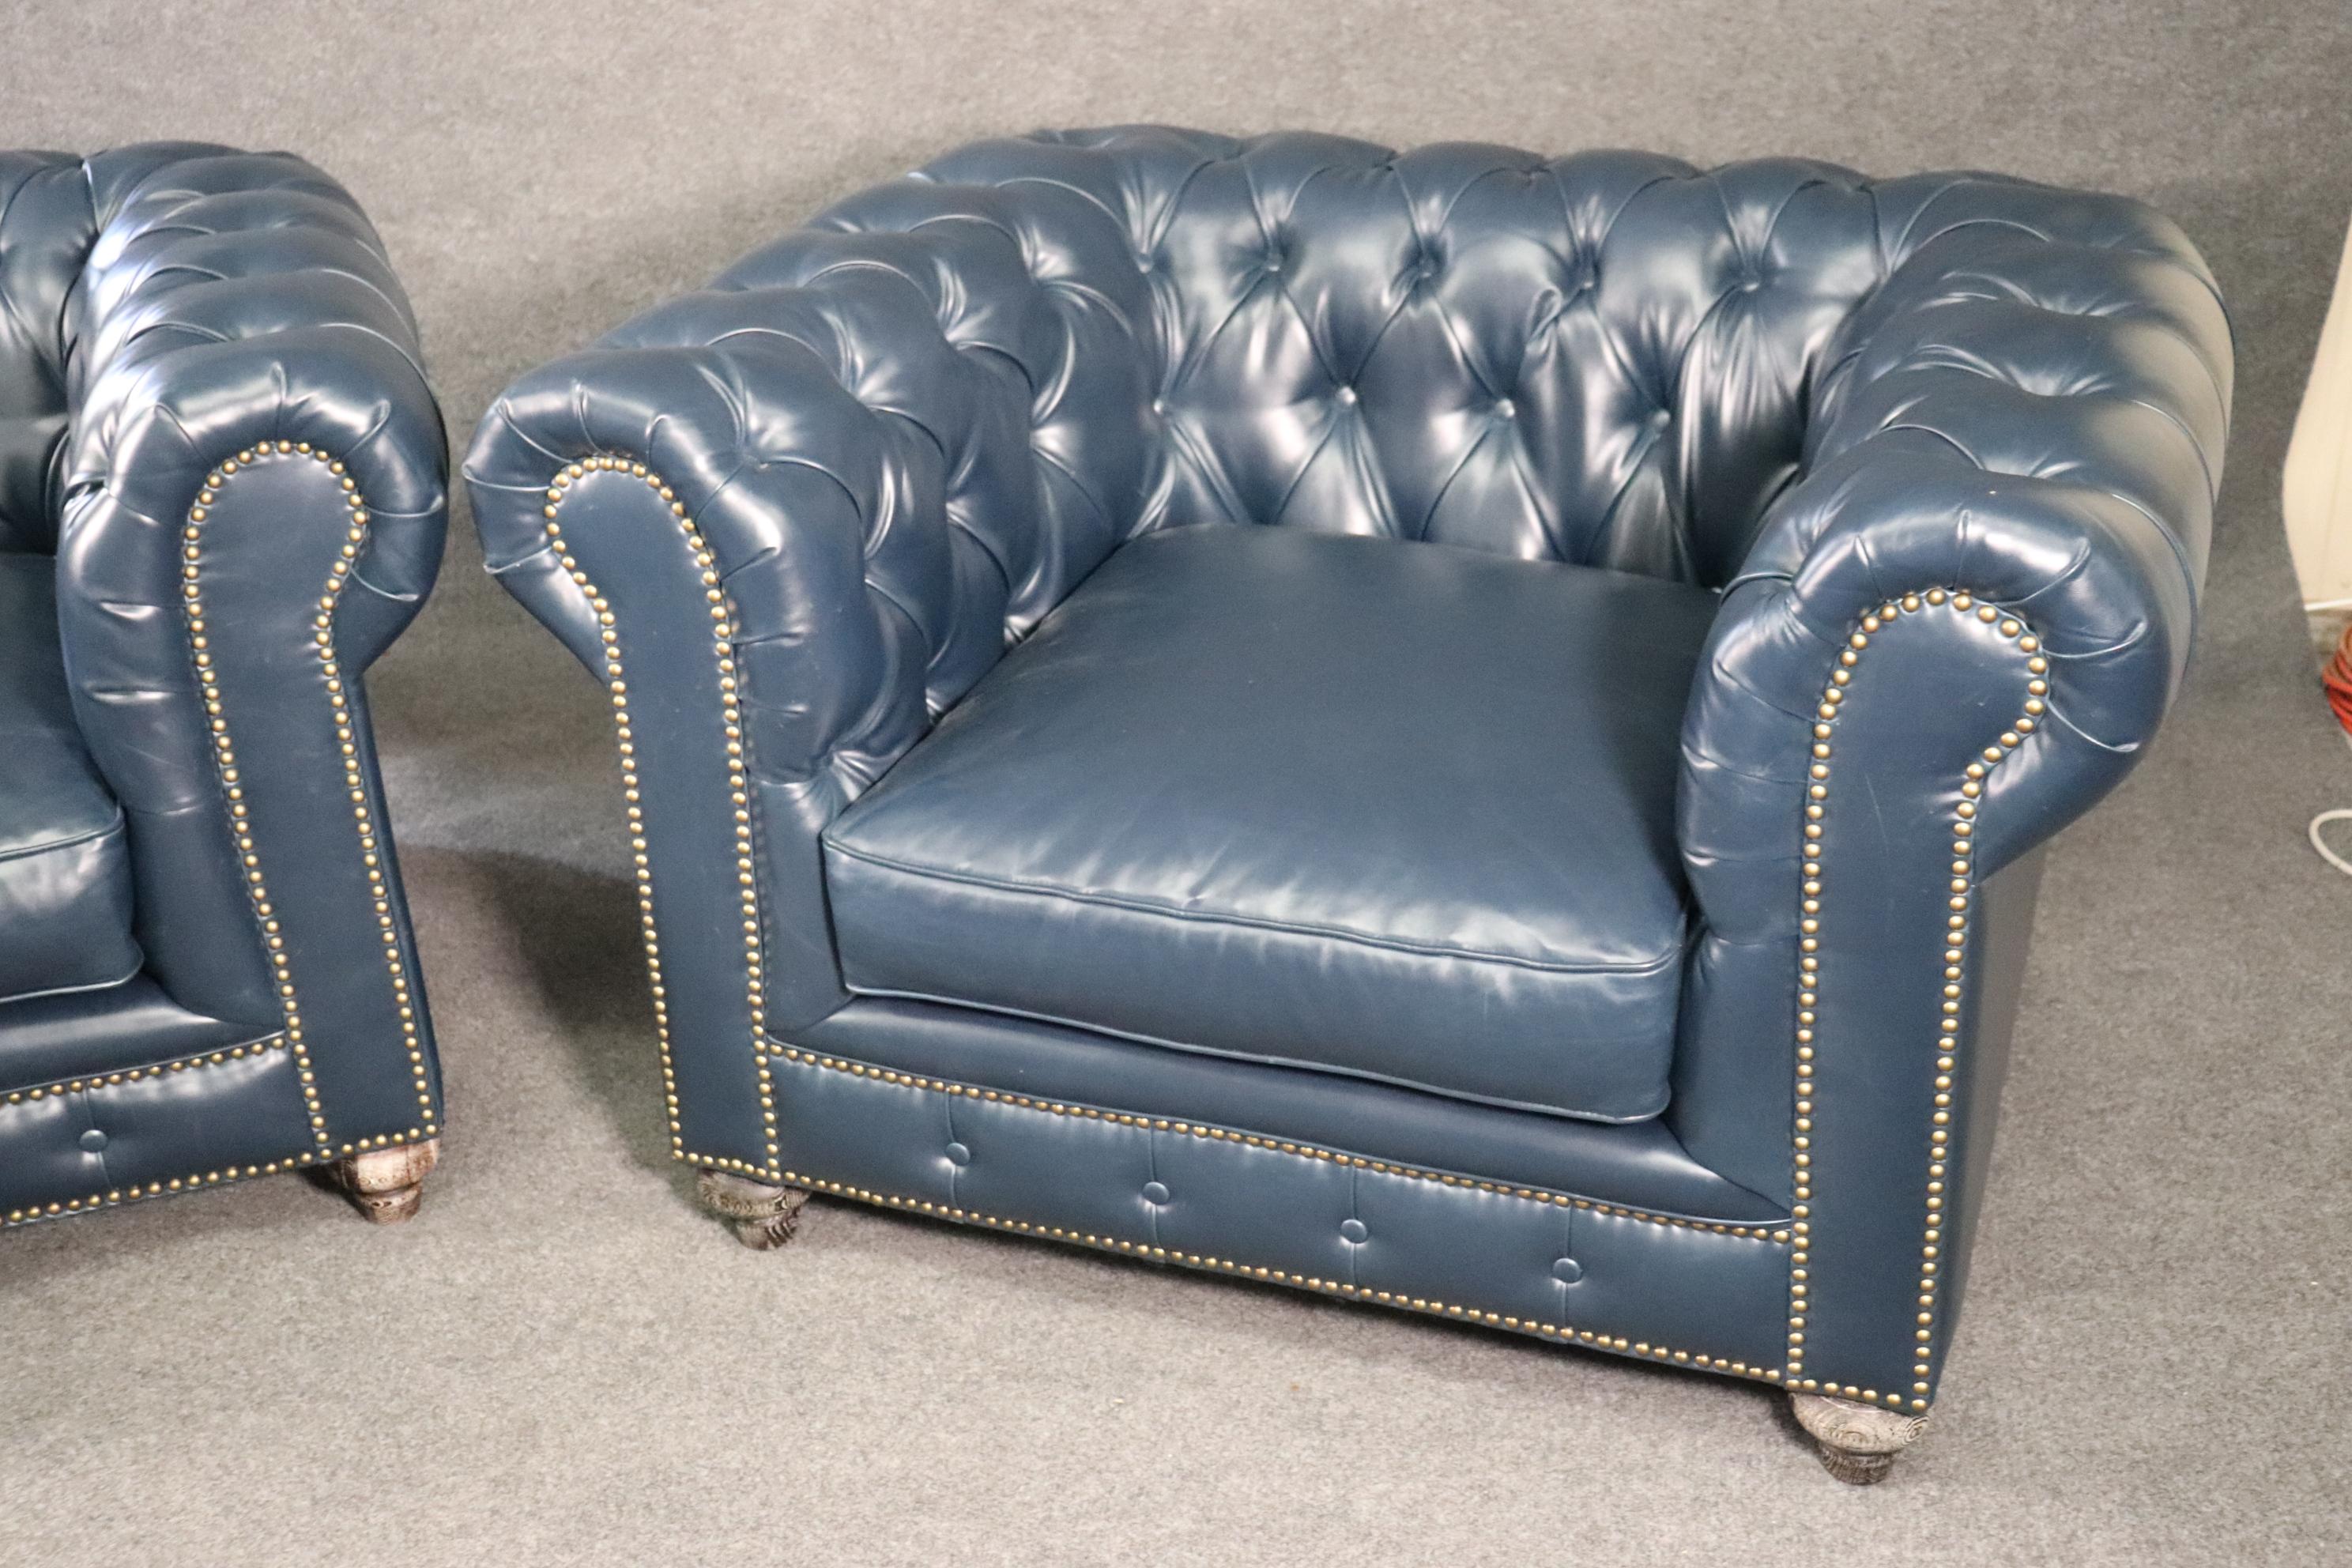 Pair High Quality Genuine Top Grain Leather Chesterfield Club Chairs Navy Blue 5